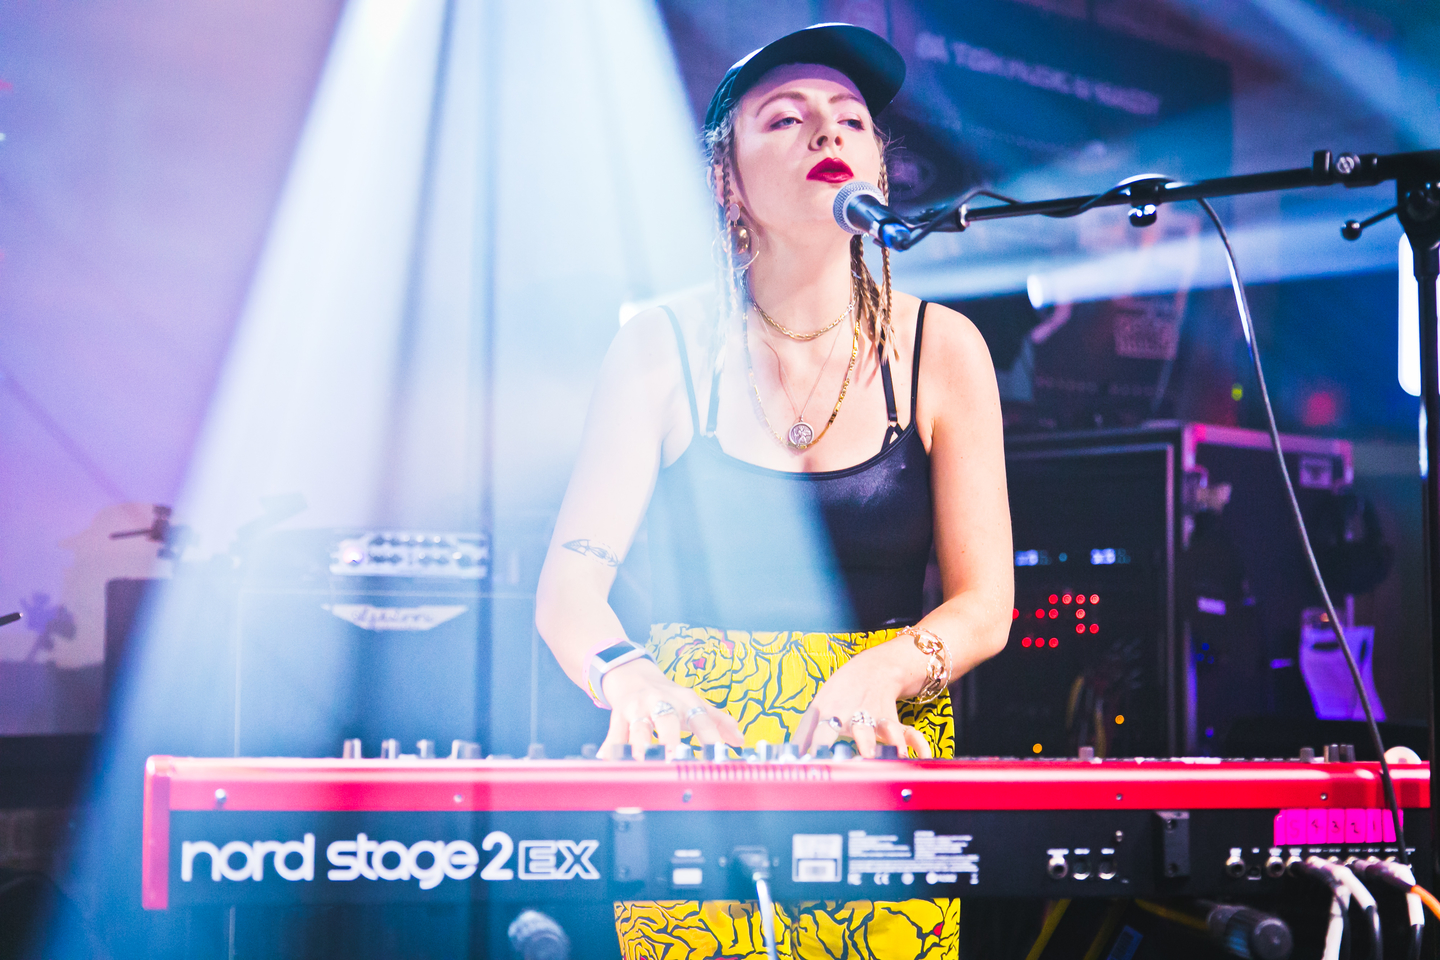 IDER, presented by BBC Radio 1 & DIT. Photo by Travis Lilley